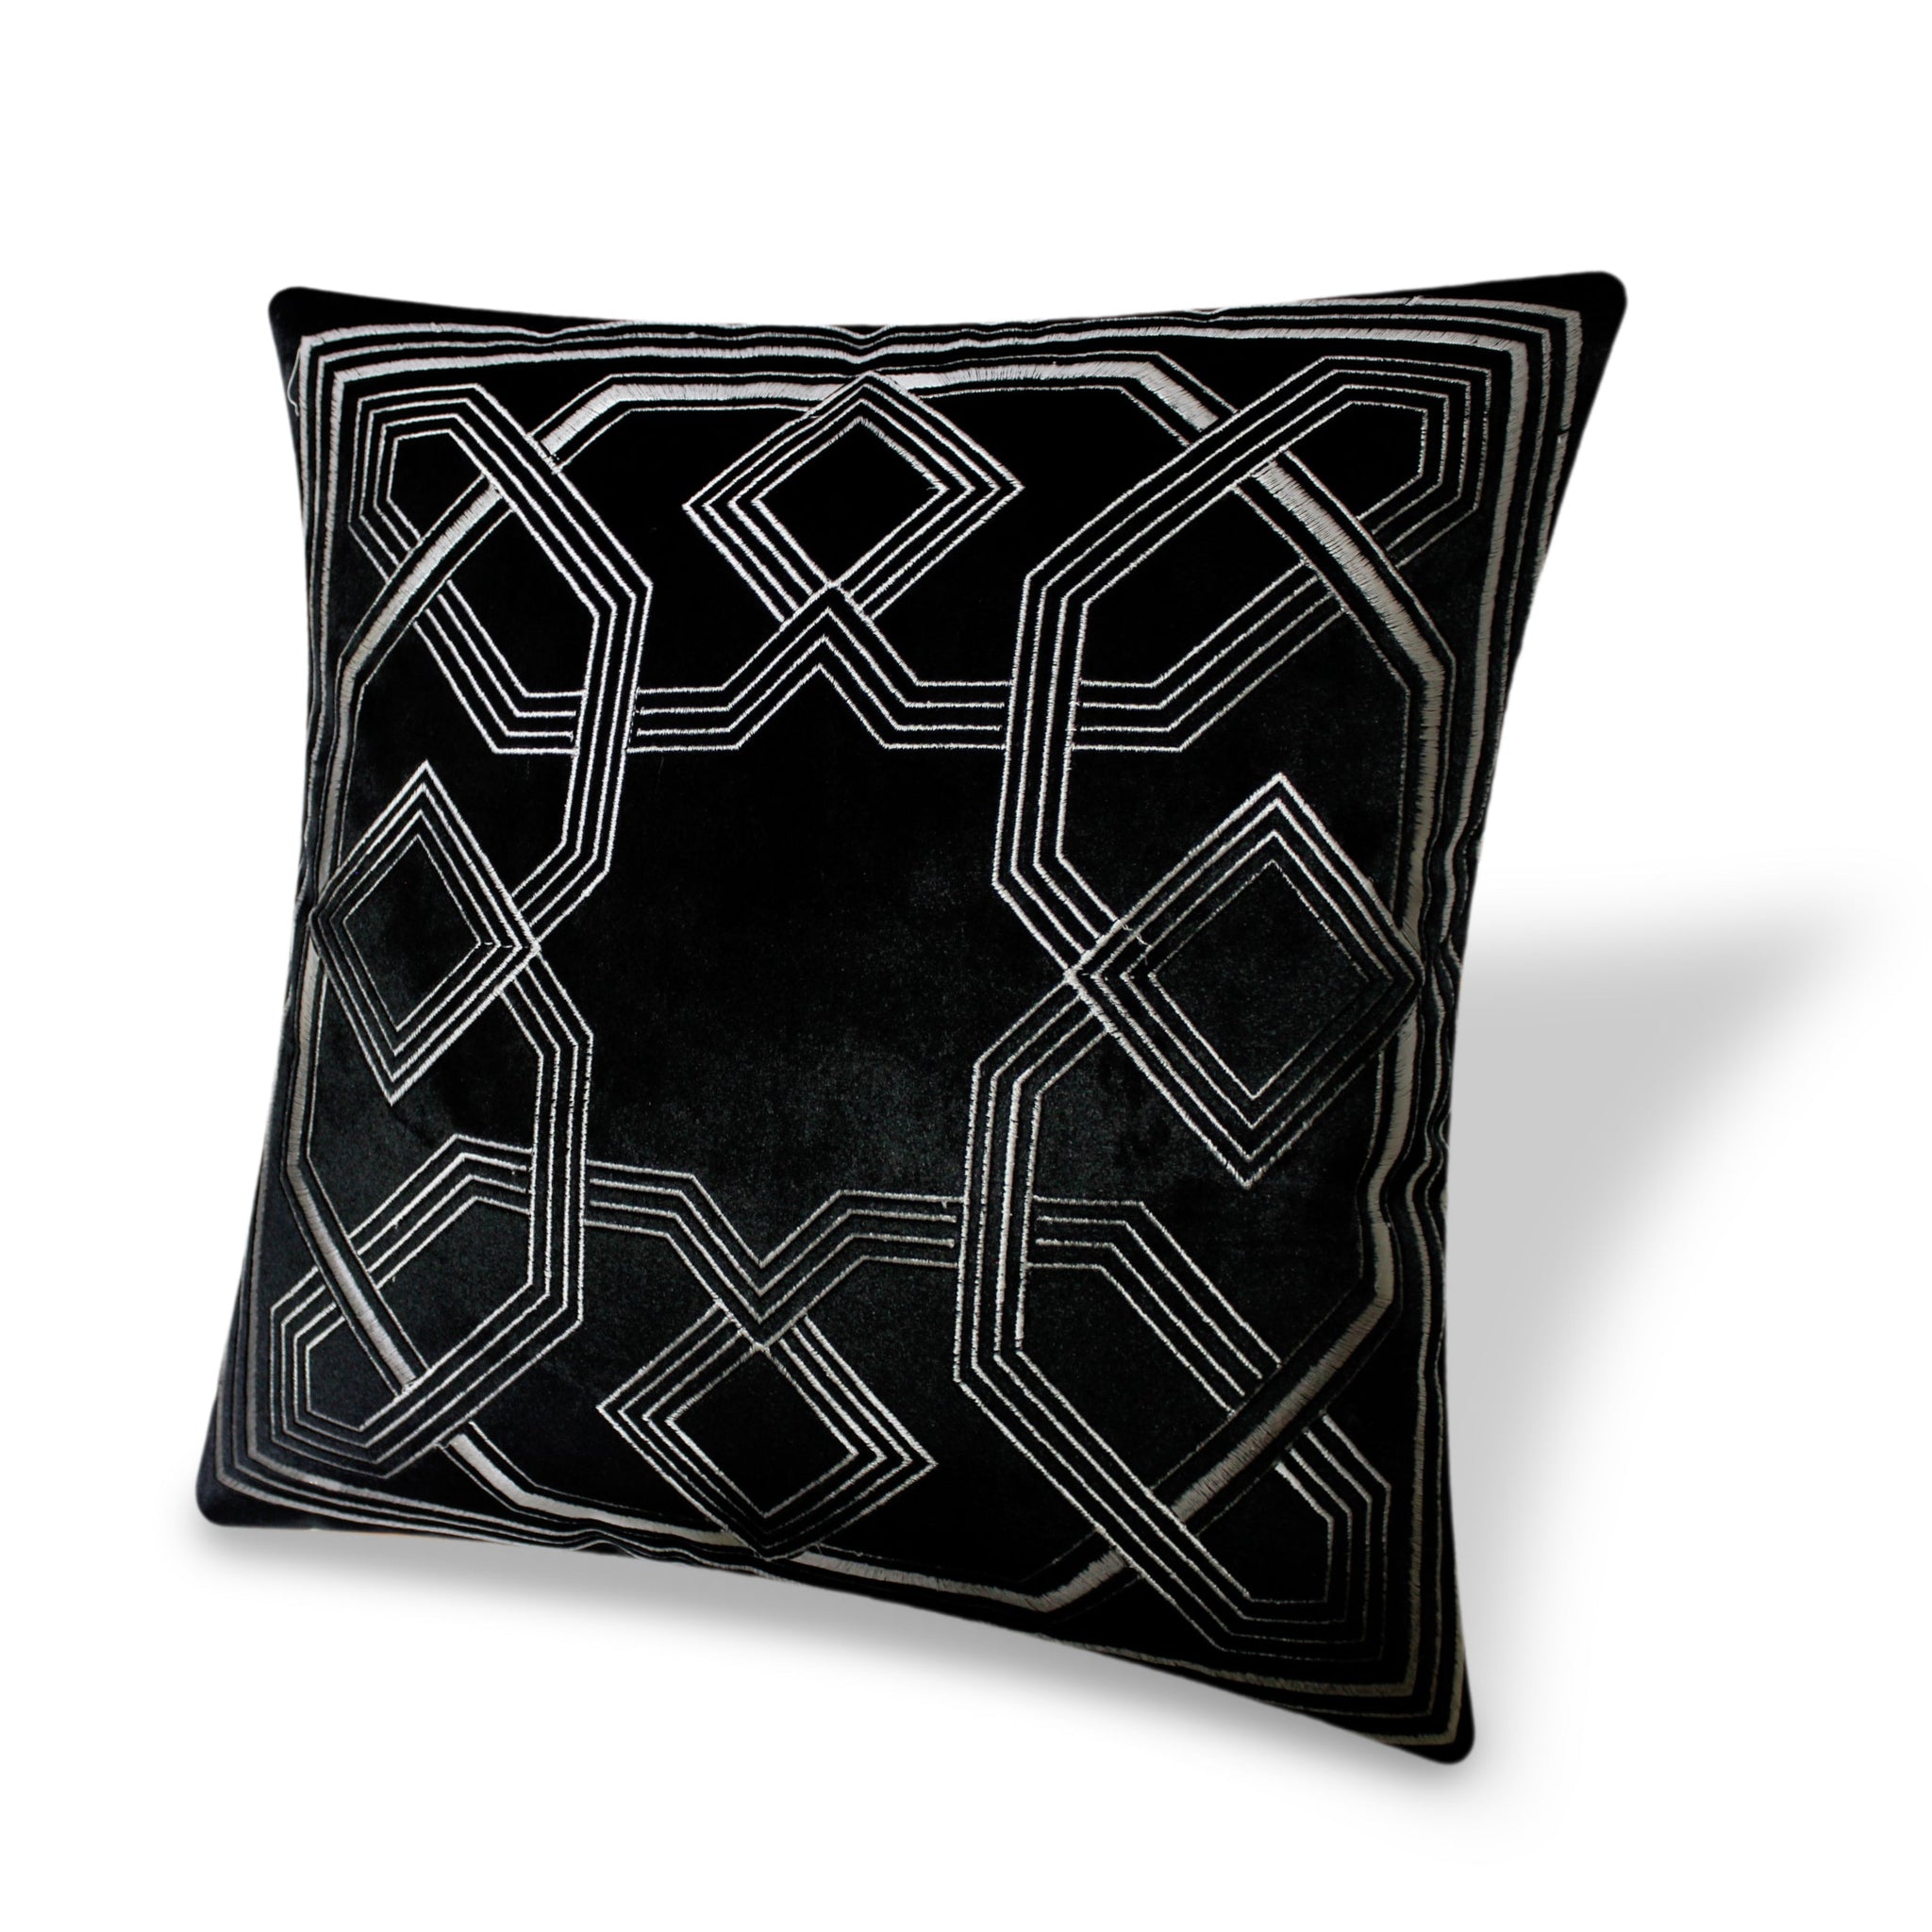 Black Velvet Cushion Cover Arabesque Geometric Embroidery Decorative Pillow Classic Home Decor Throw Pillow for Sofa Chair Living Room 45x45 cm 18x18 In